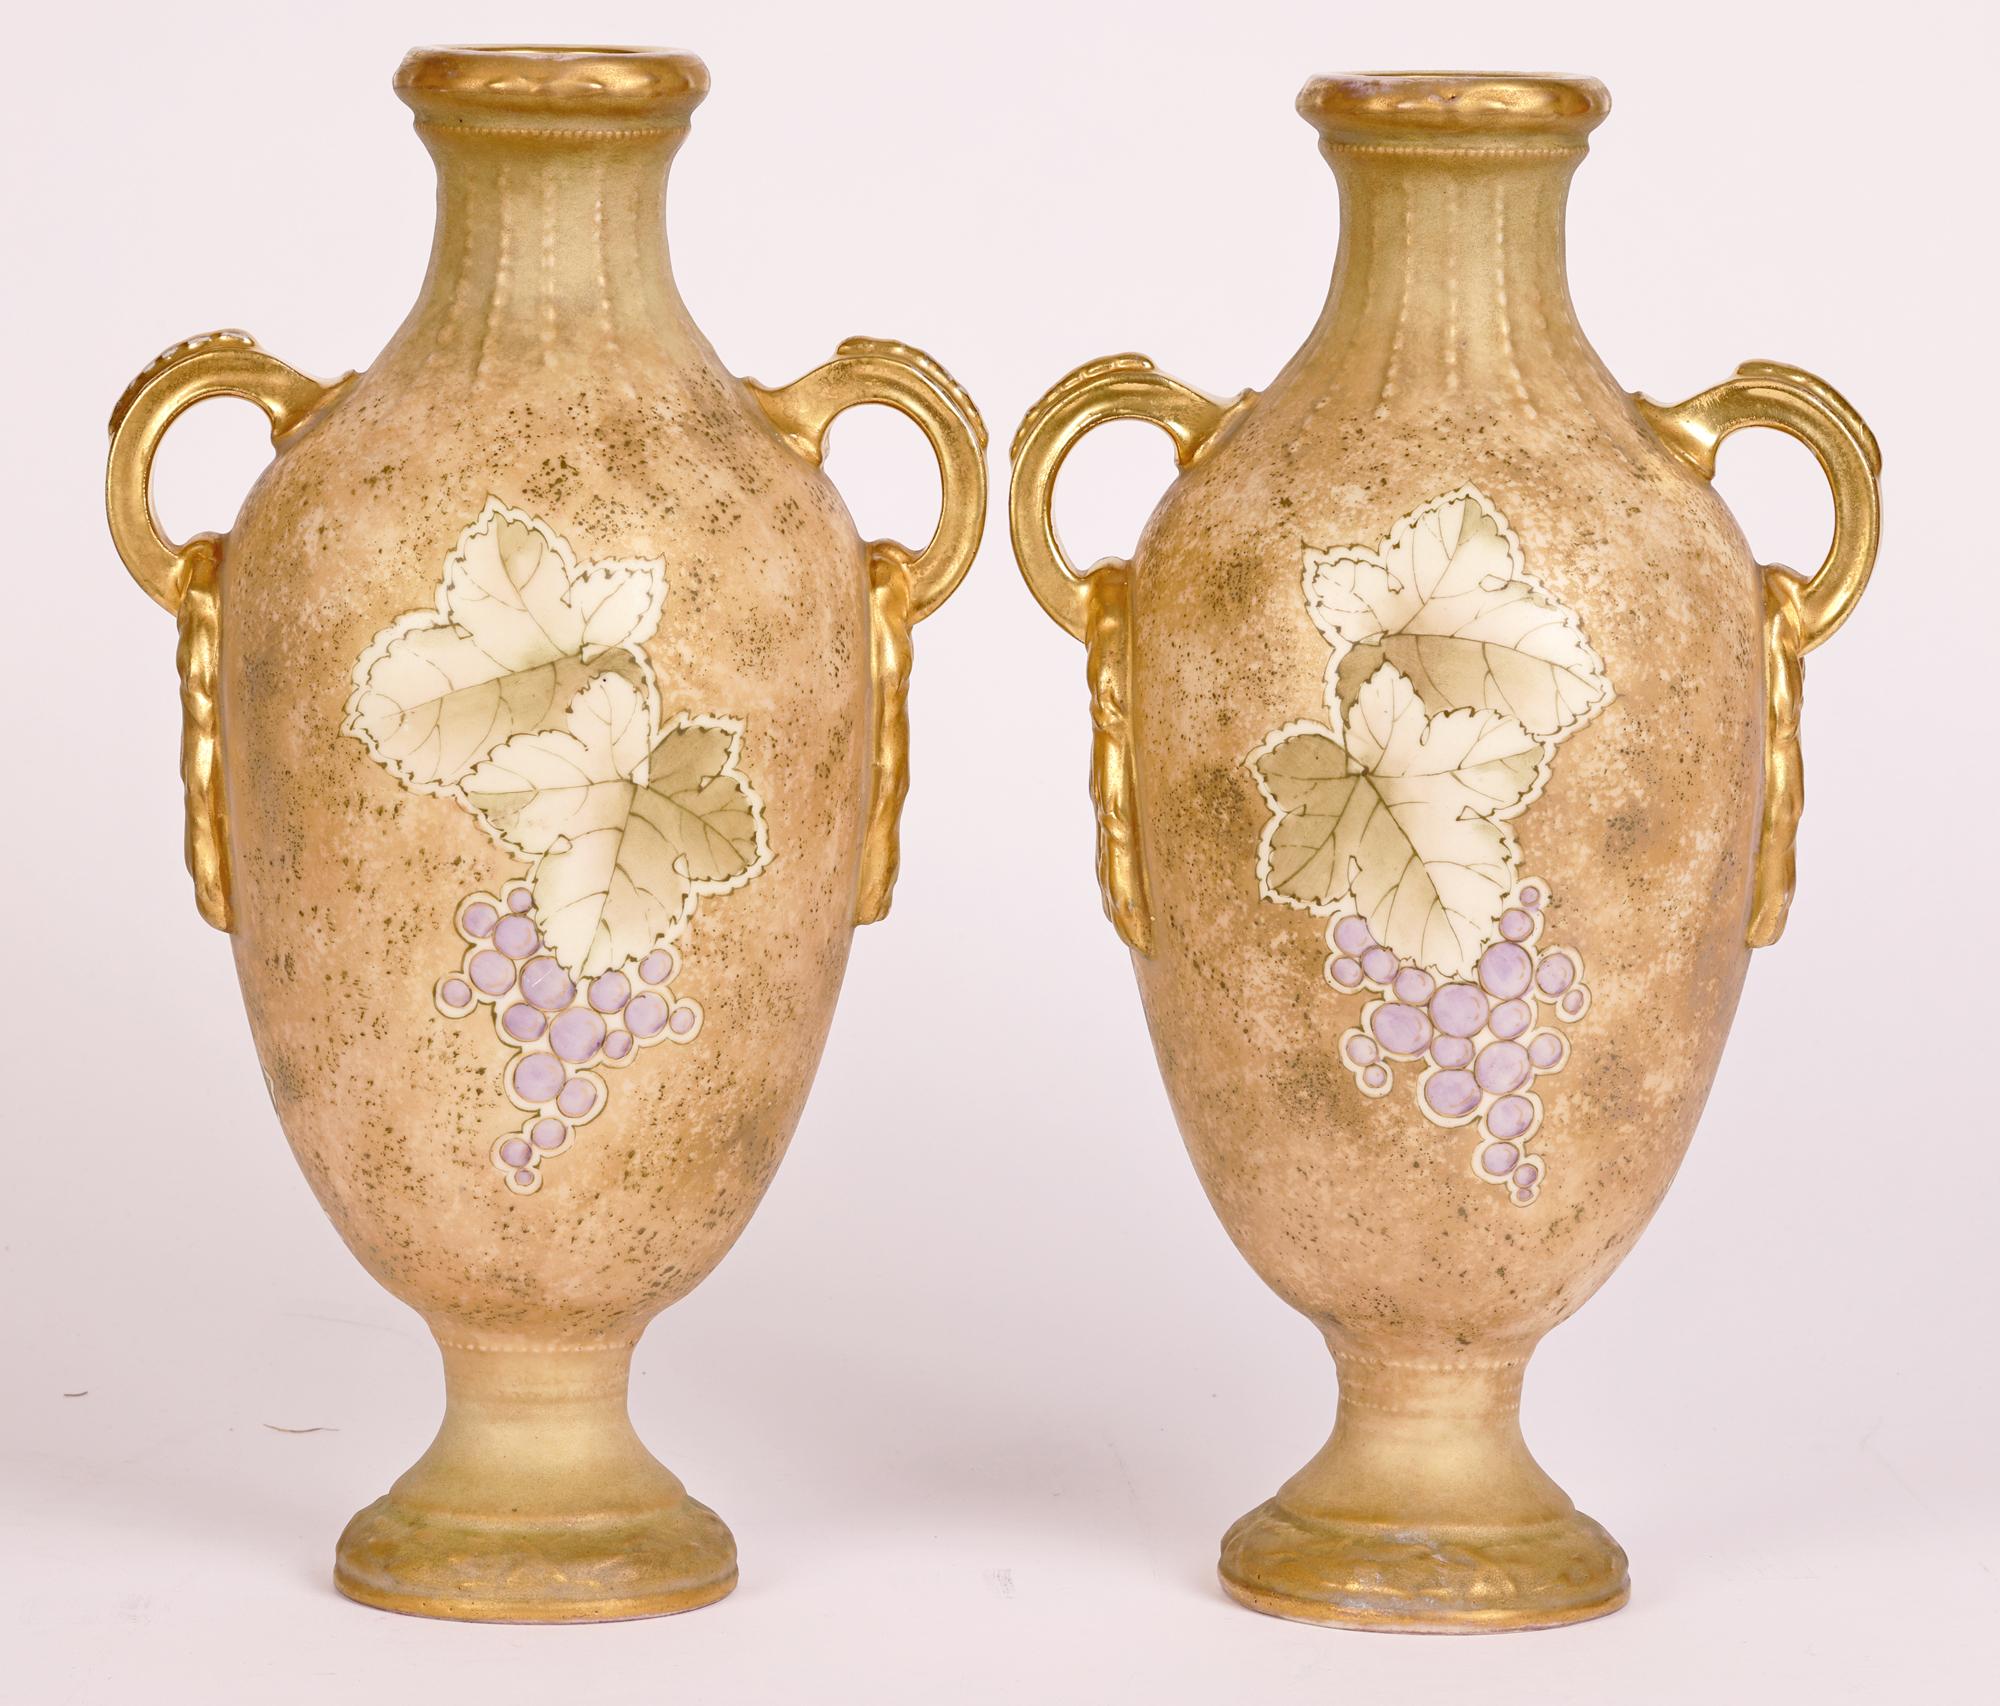 Turn Teplitz RSK Amphora Pair Art Nouveau Hand-Painted Twin Handled Vases For Sale 1